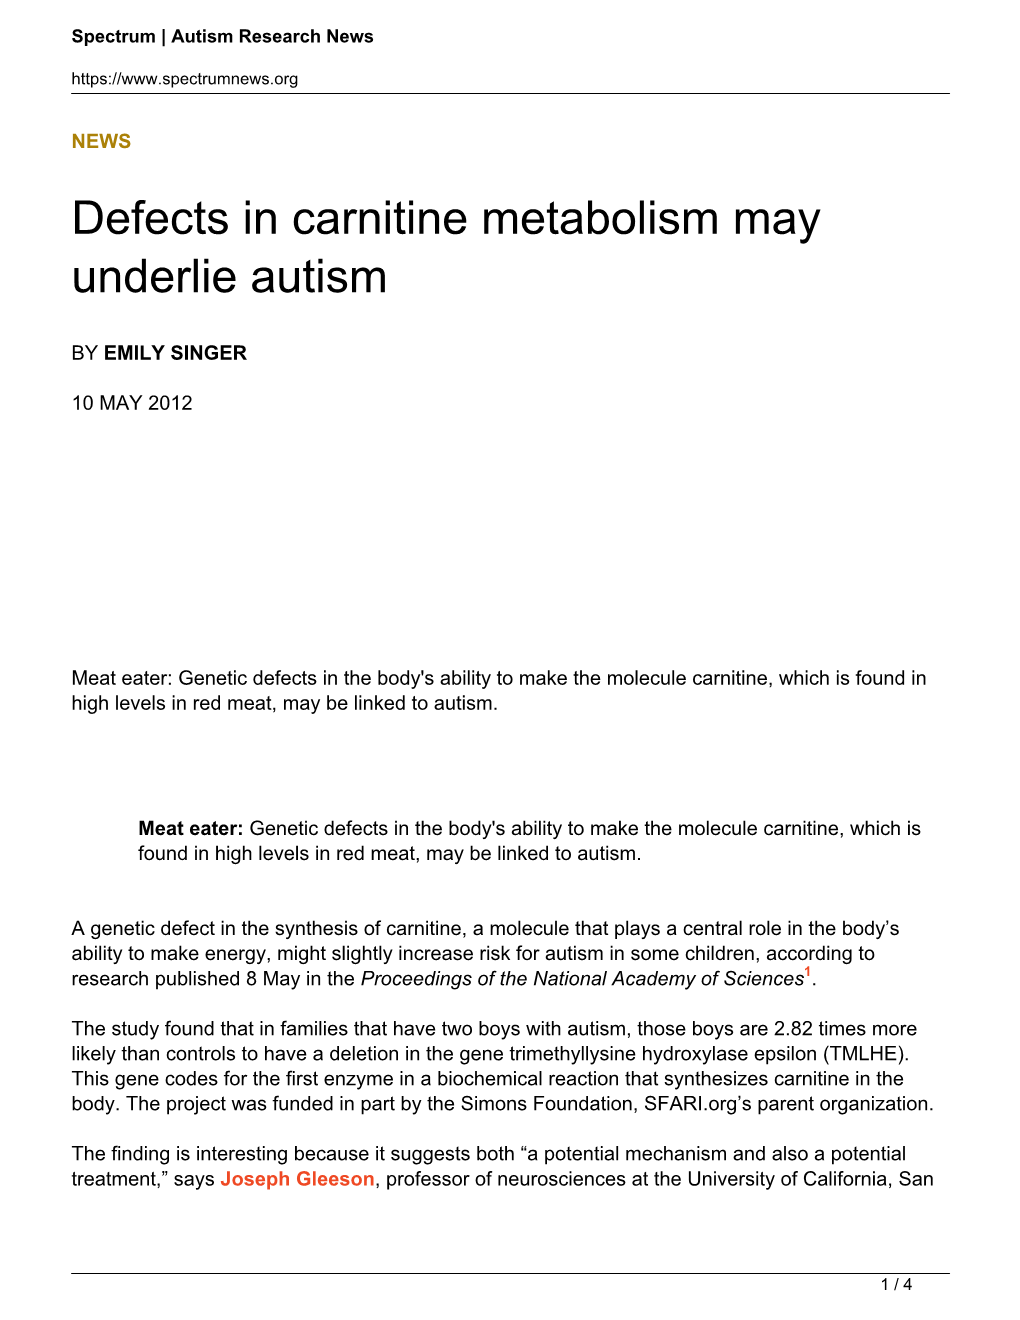 Defects in Carnitine Metabolism May Underlie Autism